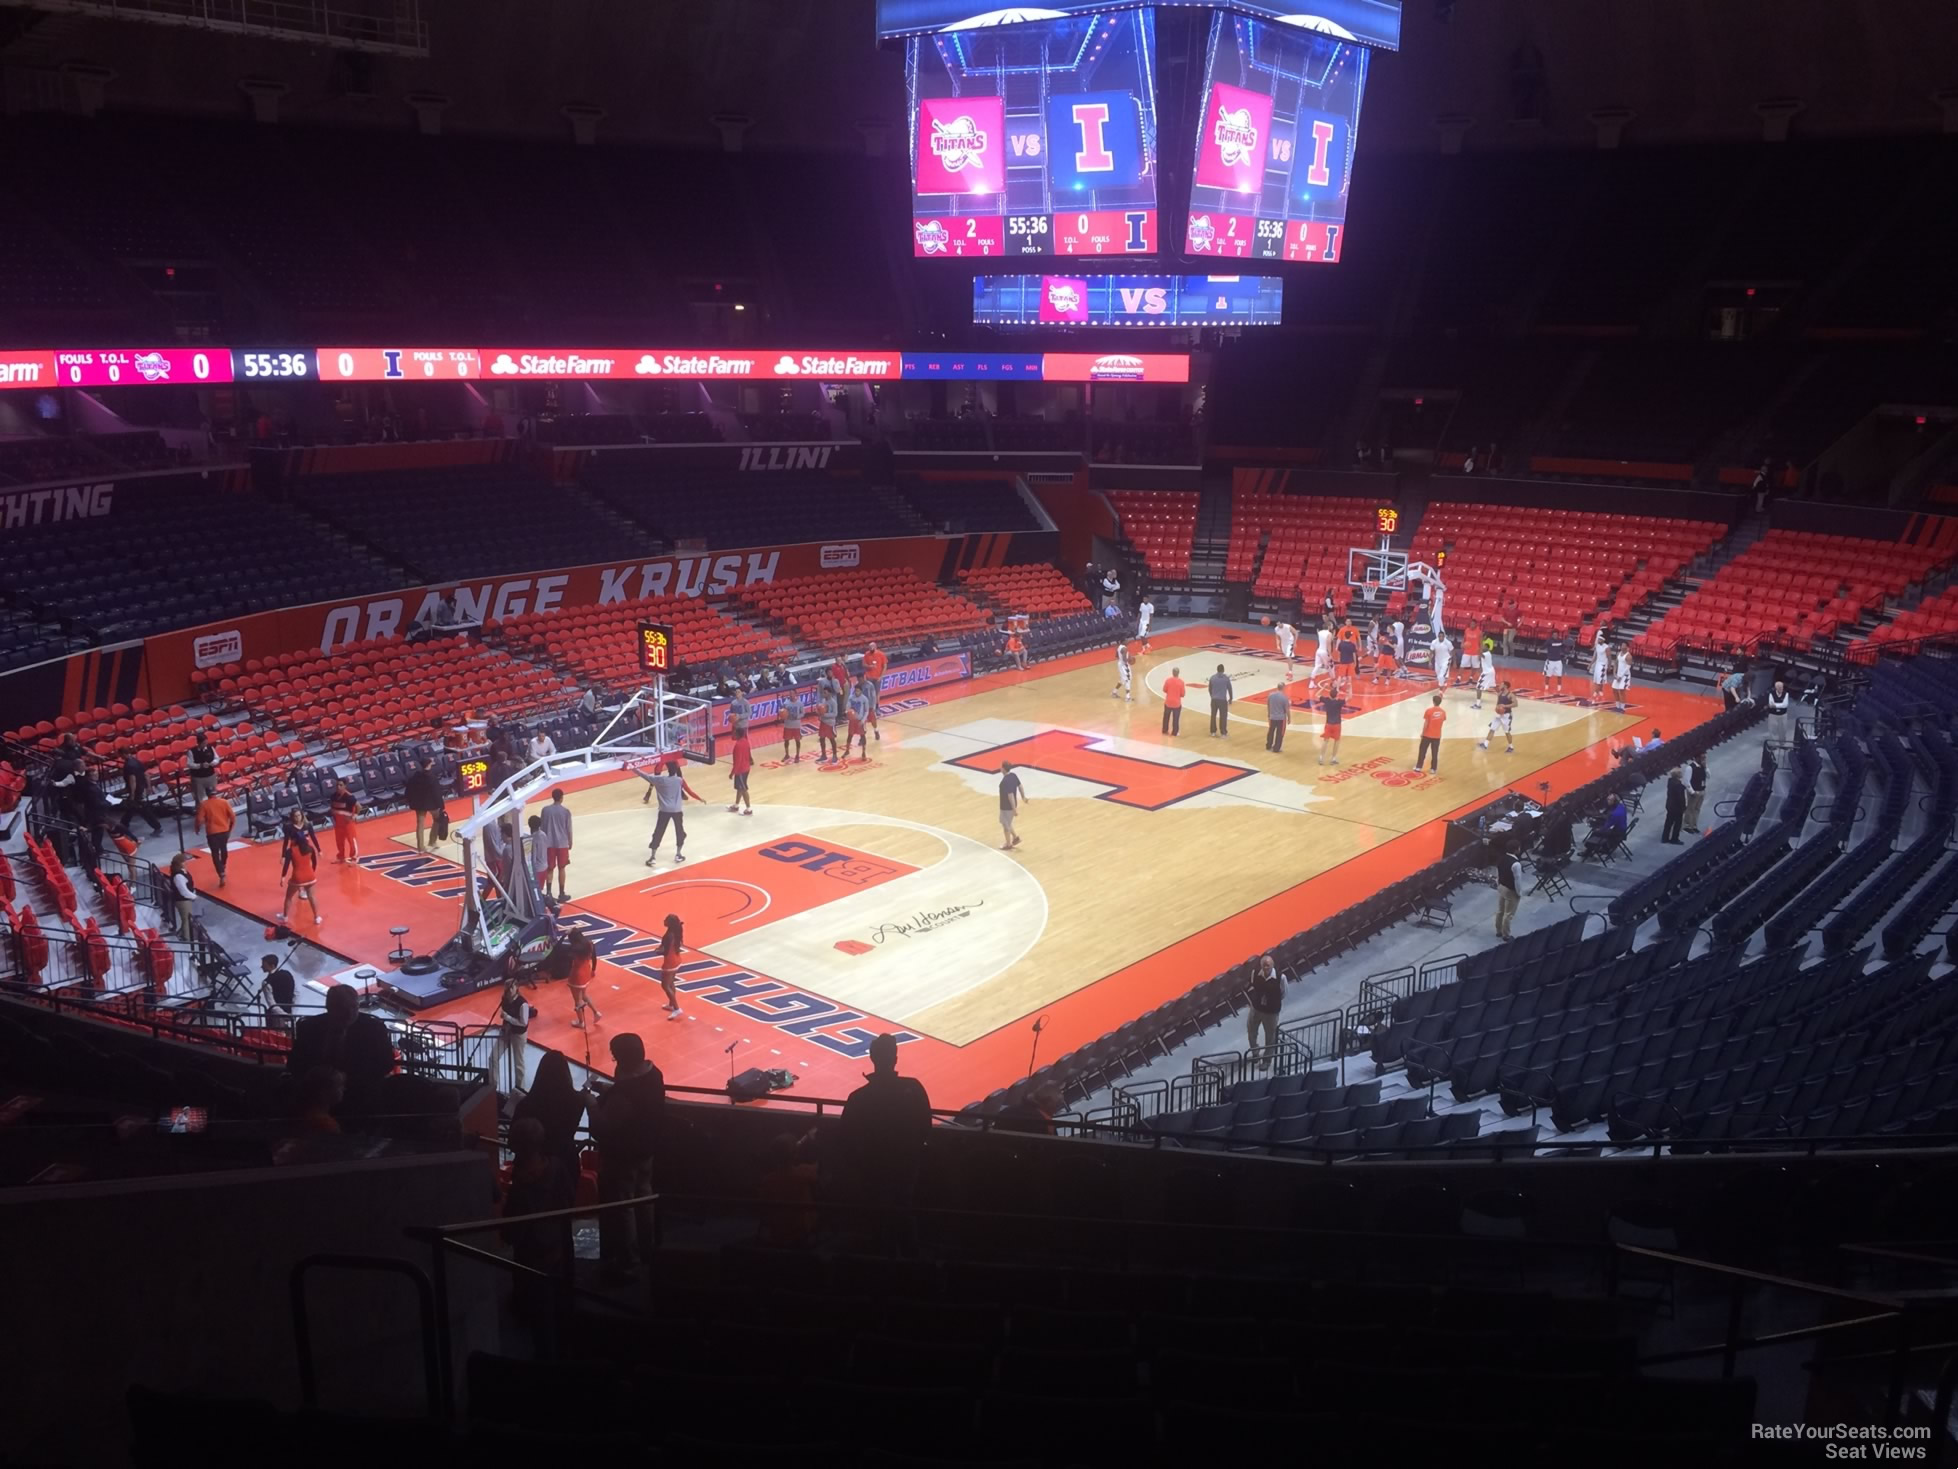 section 125, row 11 seat view  - state farm center